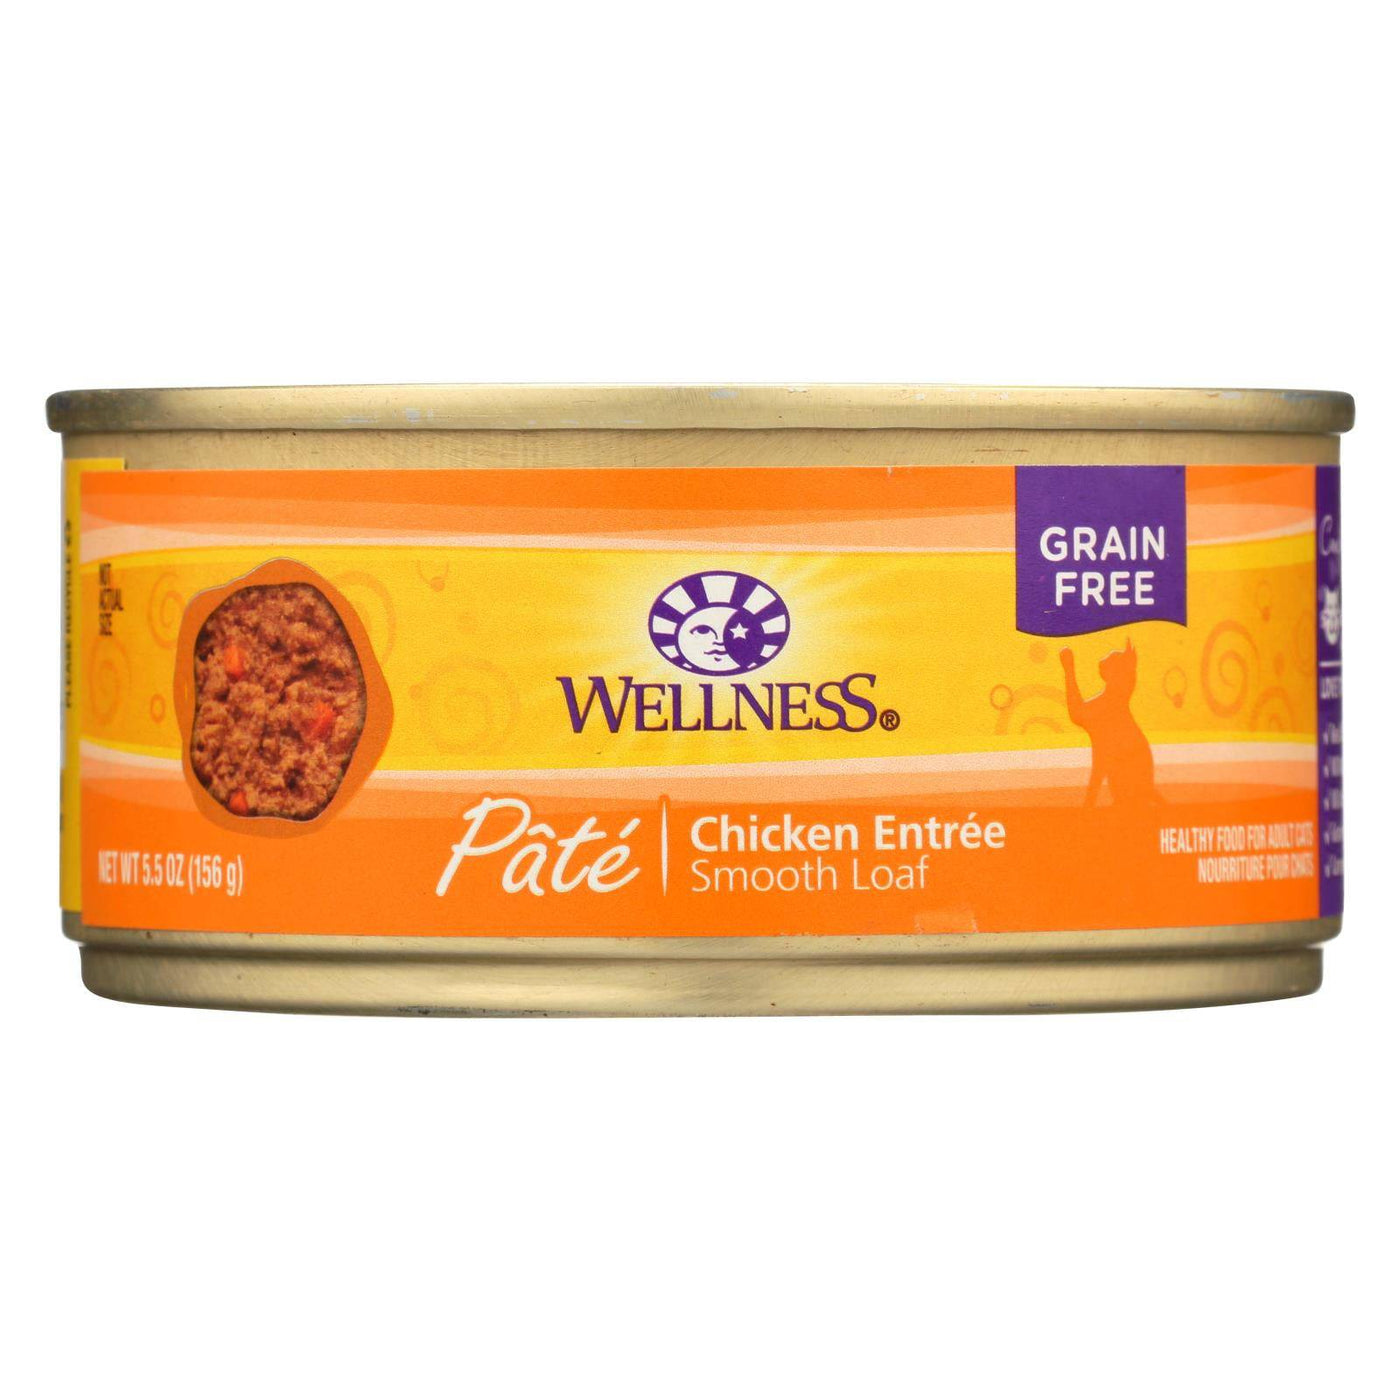 Buy Wellness Pet Products Cat Food - Chicken Recipe - Case Of 24 - 5.5 Oz.  at OnlyNaturals.us